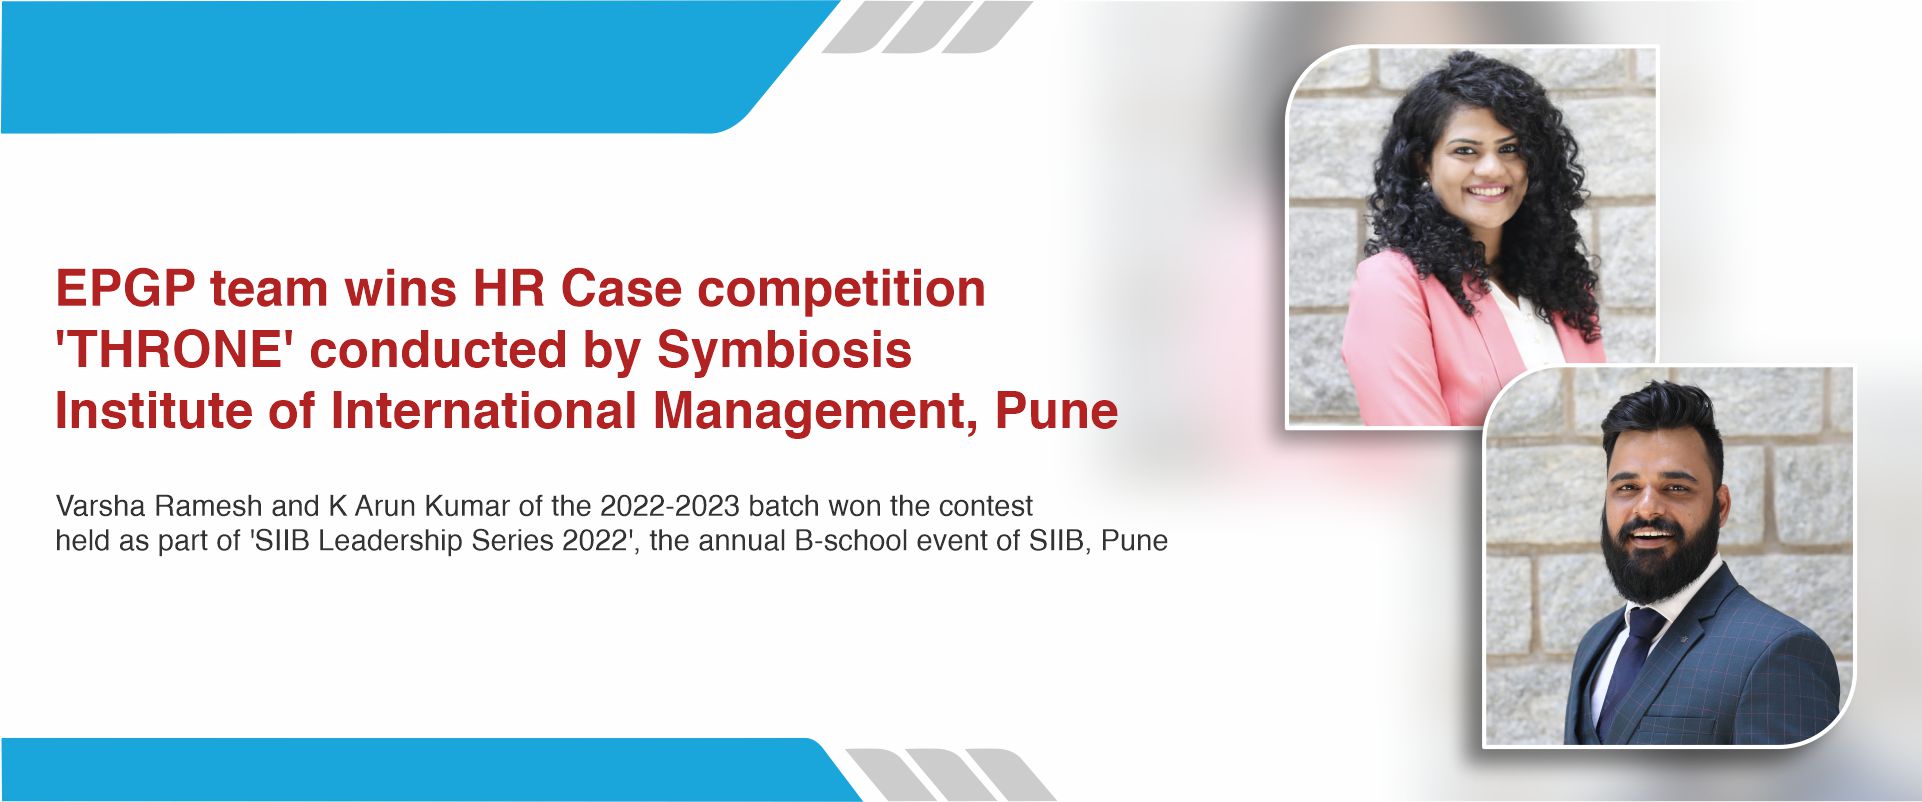 EPGP team wins HR Case competition ‘THRONE’ conducted by Symbiosis Institute of International Management, Pune